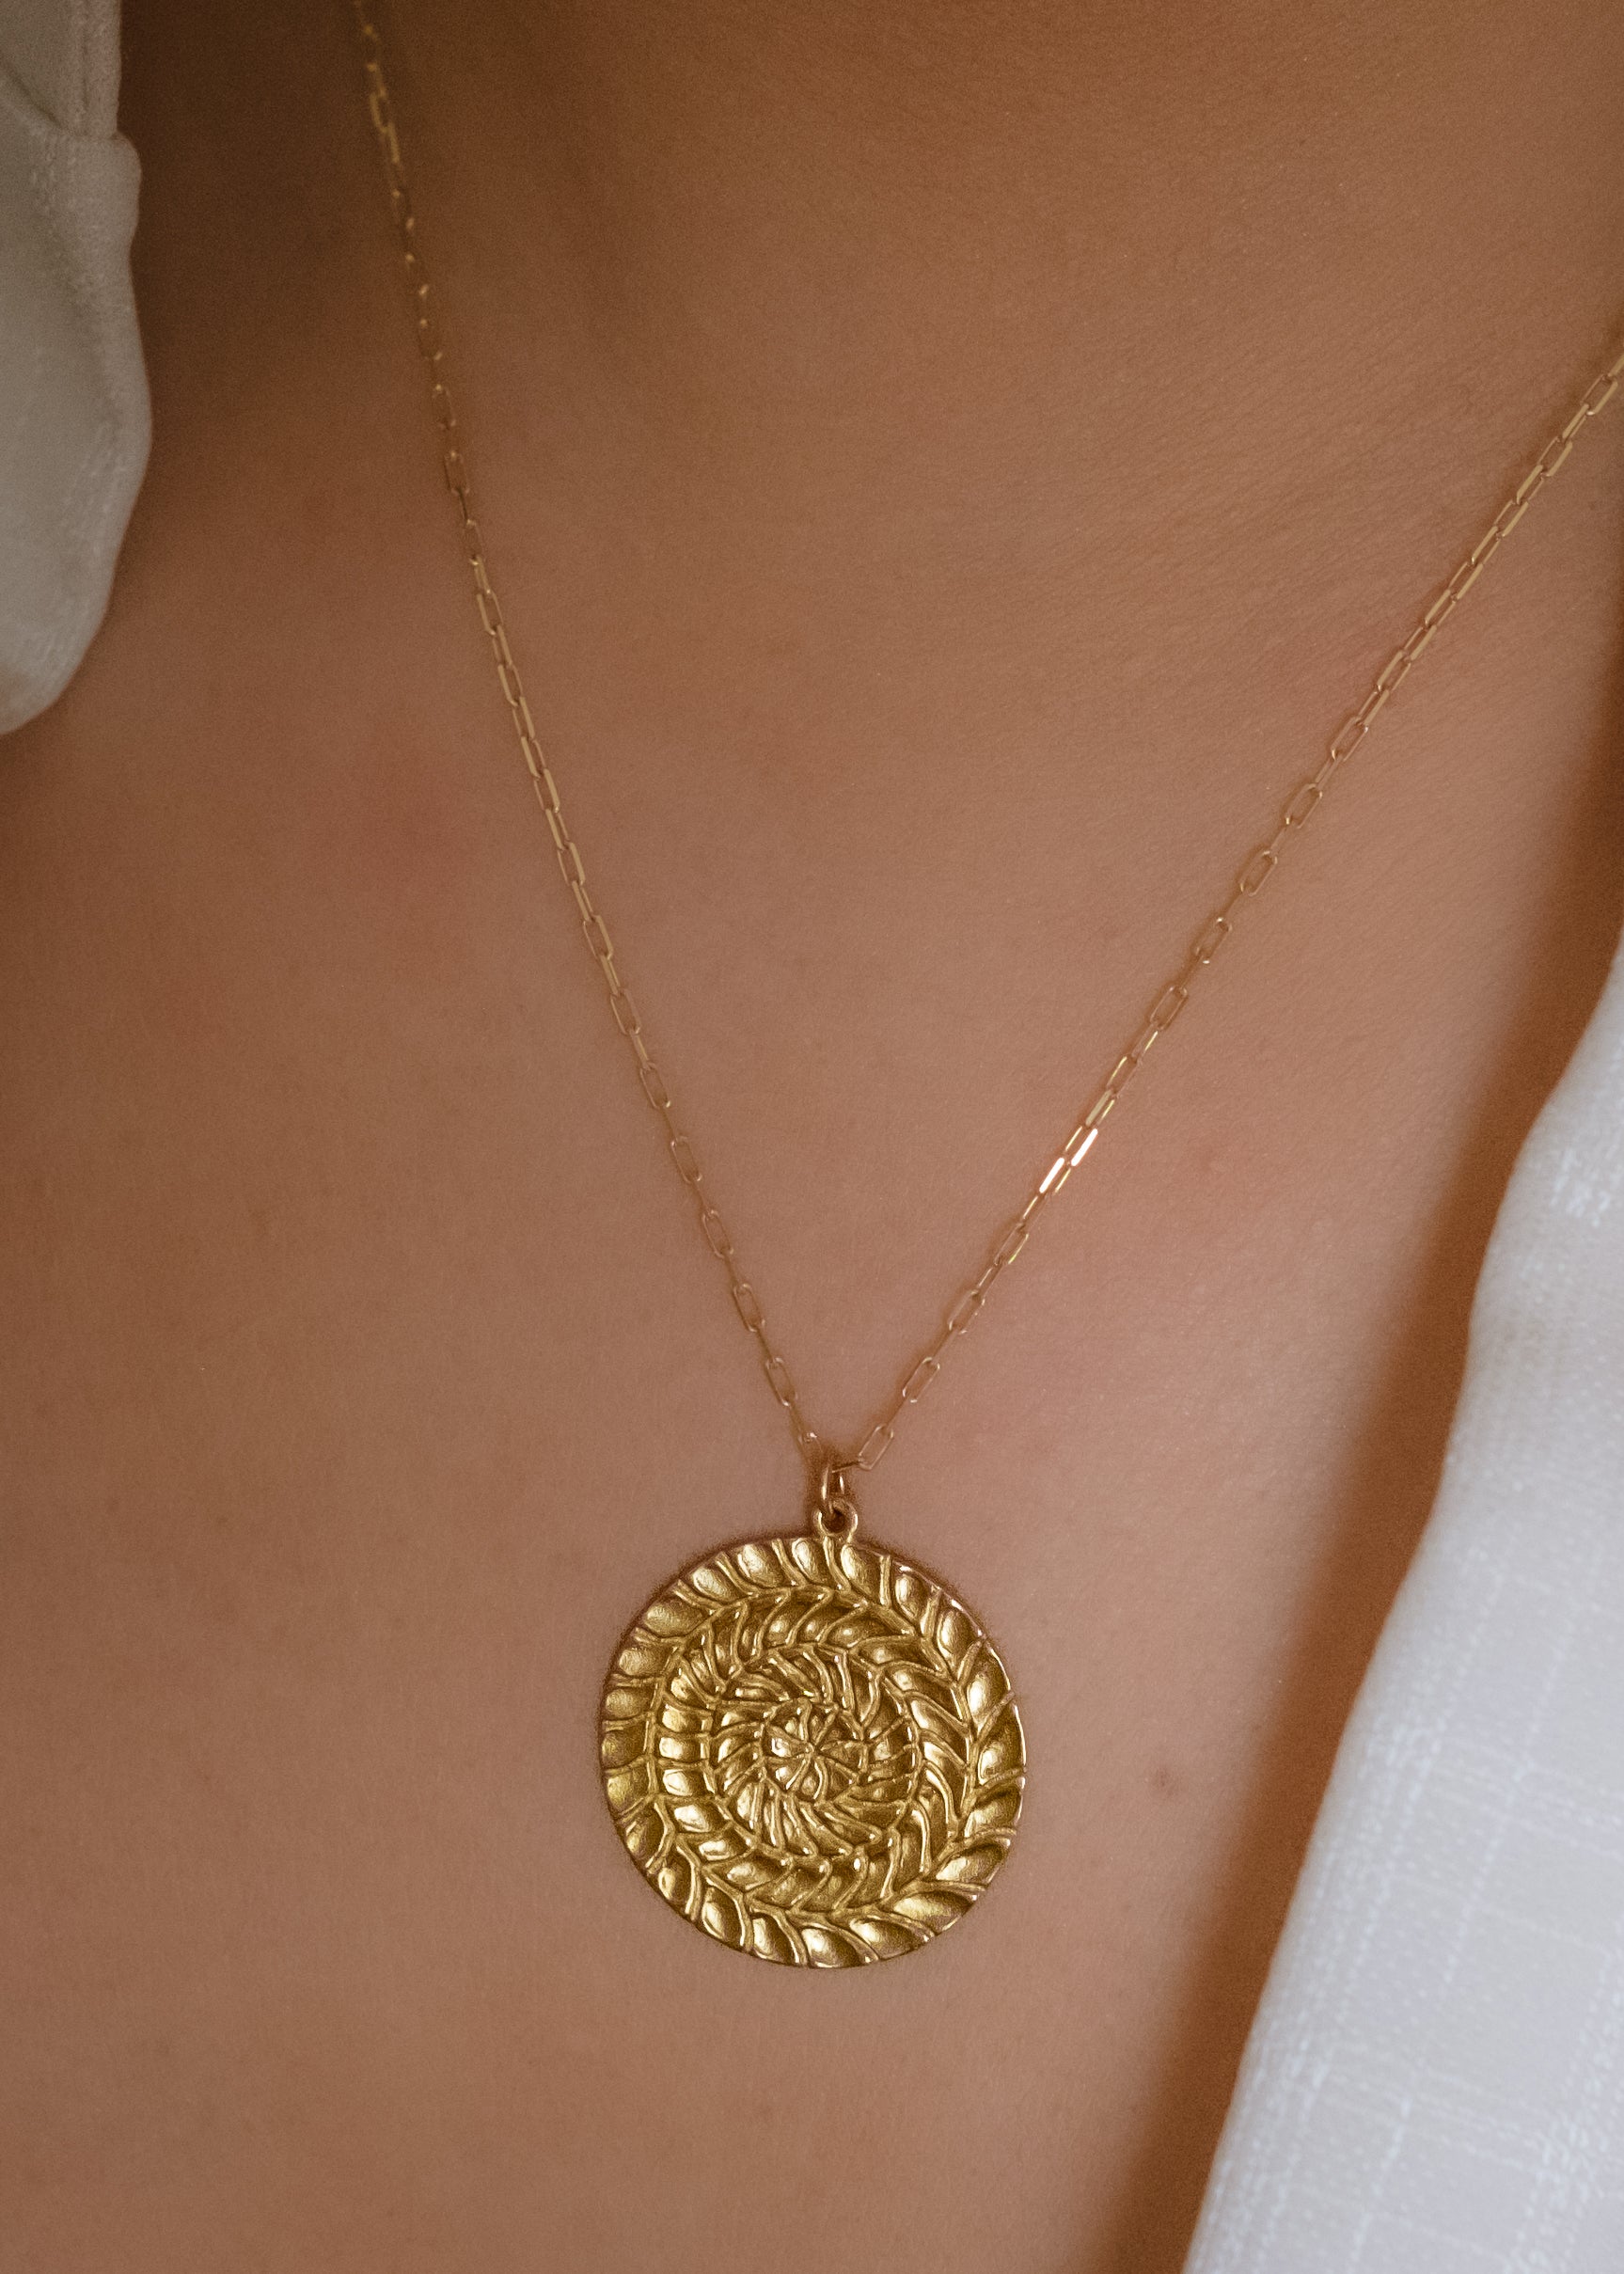 Named for Busby Berkely’s wife, the Etta necklace is a kaleidoscopic wonder that mirrors his elaborate geometric choreography. Four concentric circles, each detailed by hand, create a hypnotic and substantial pendant necklace as timeless as Berkeley’s black and white films. 